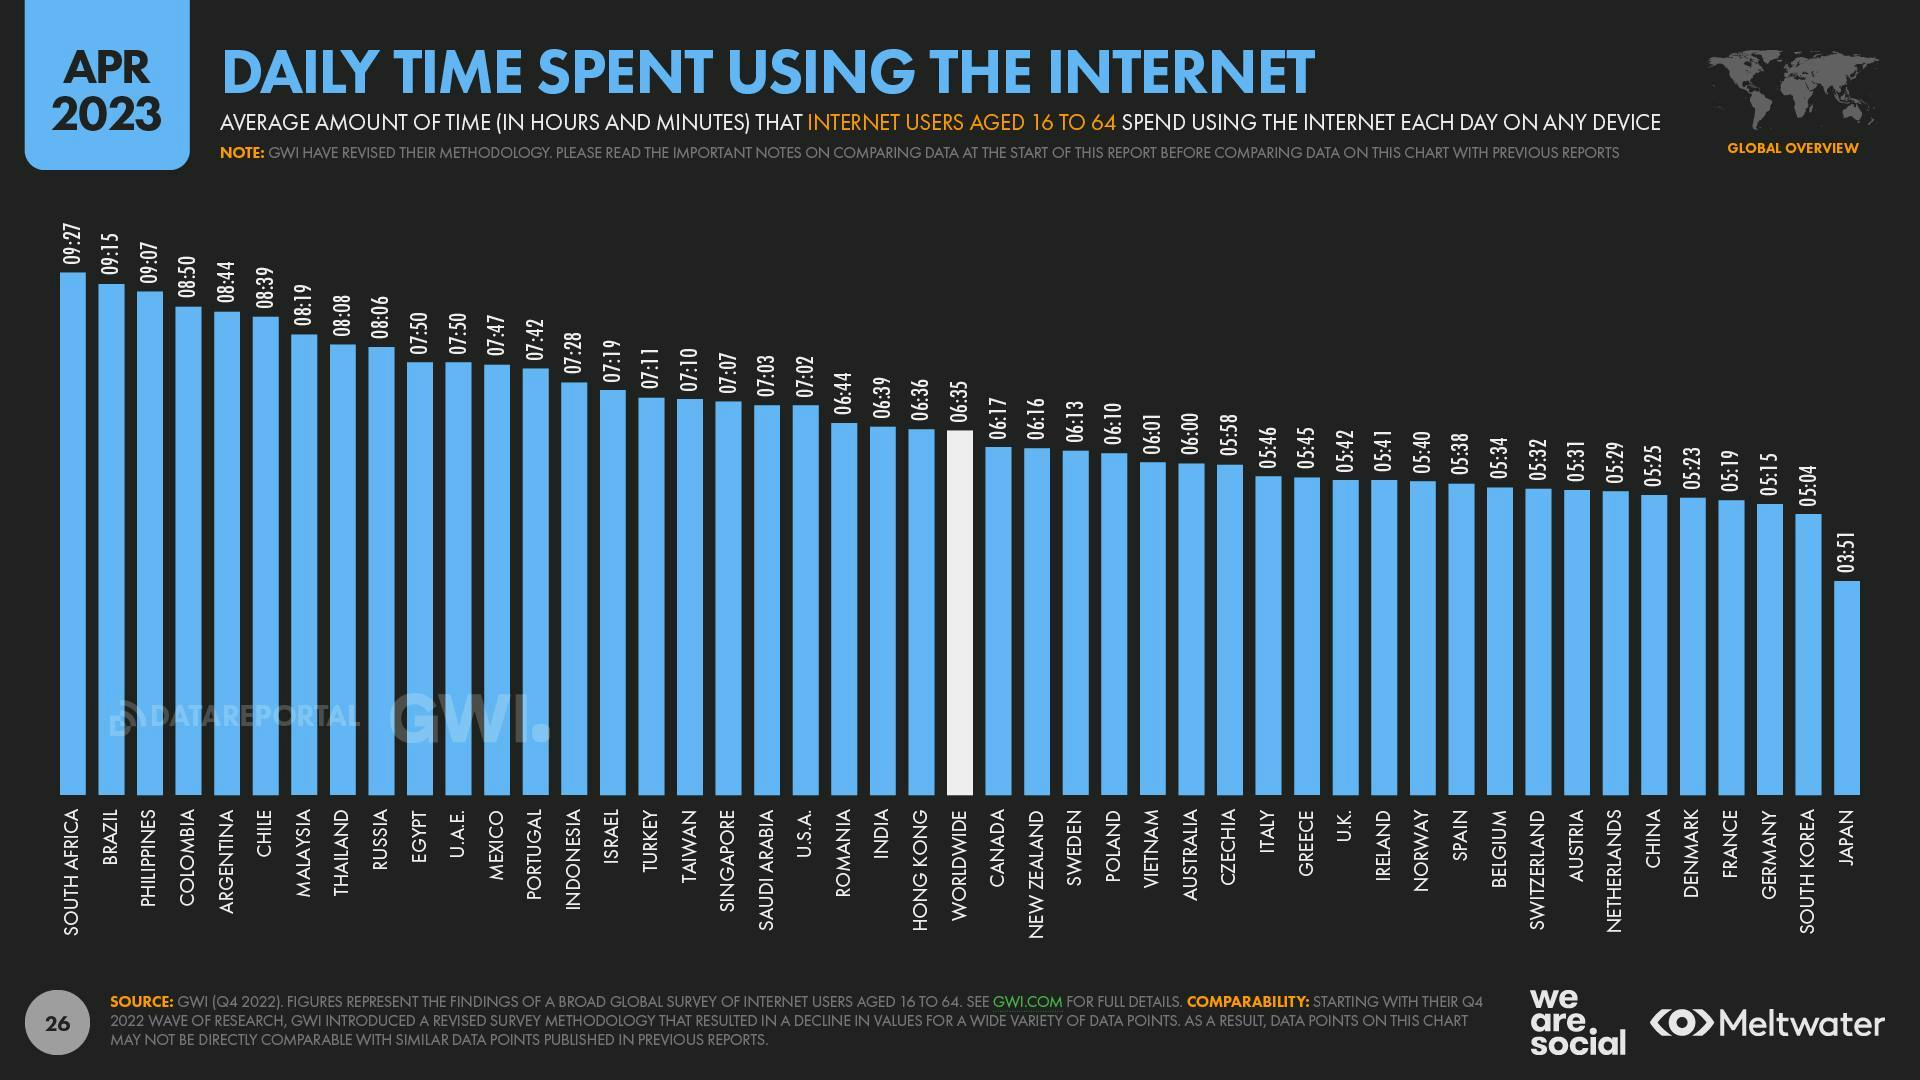 April 2023 Global State of Digital Report: Daily Time Spent Using the Internet